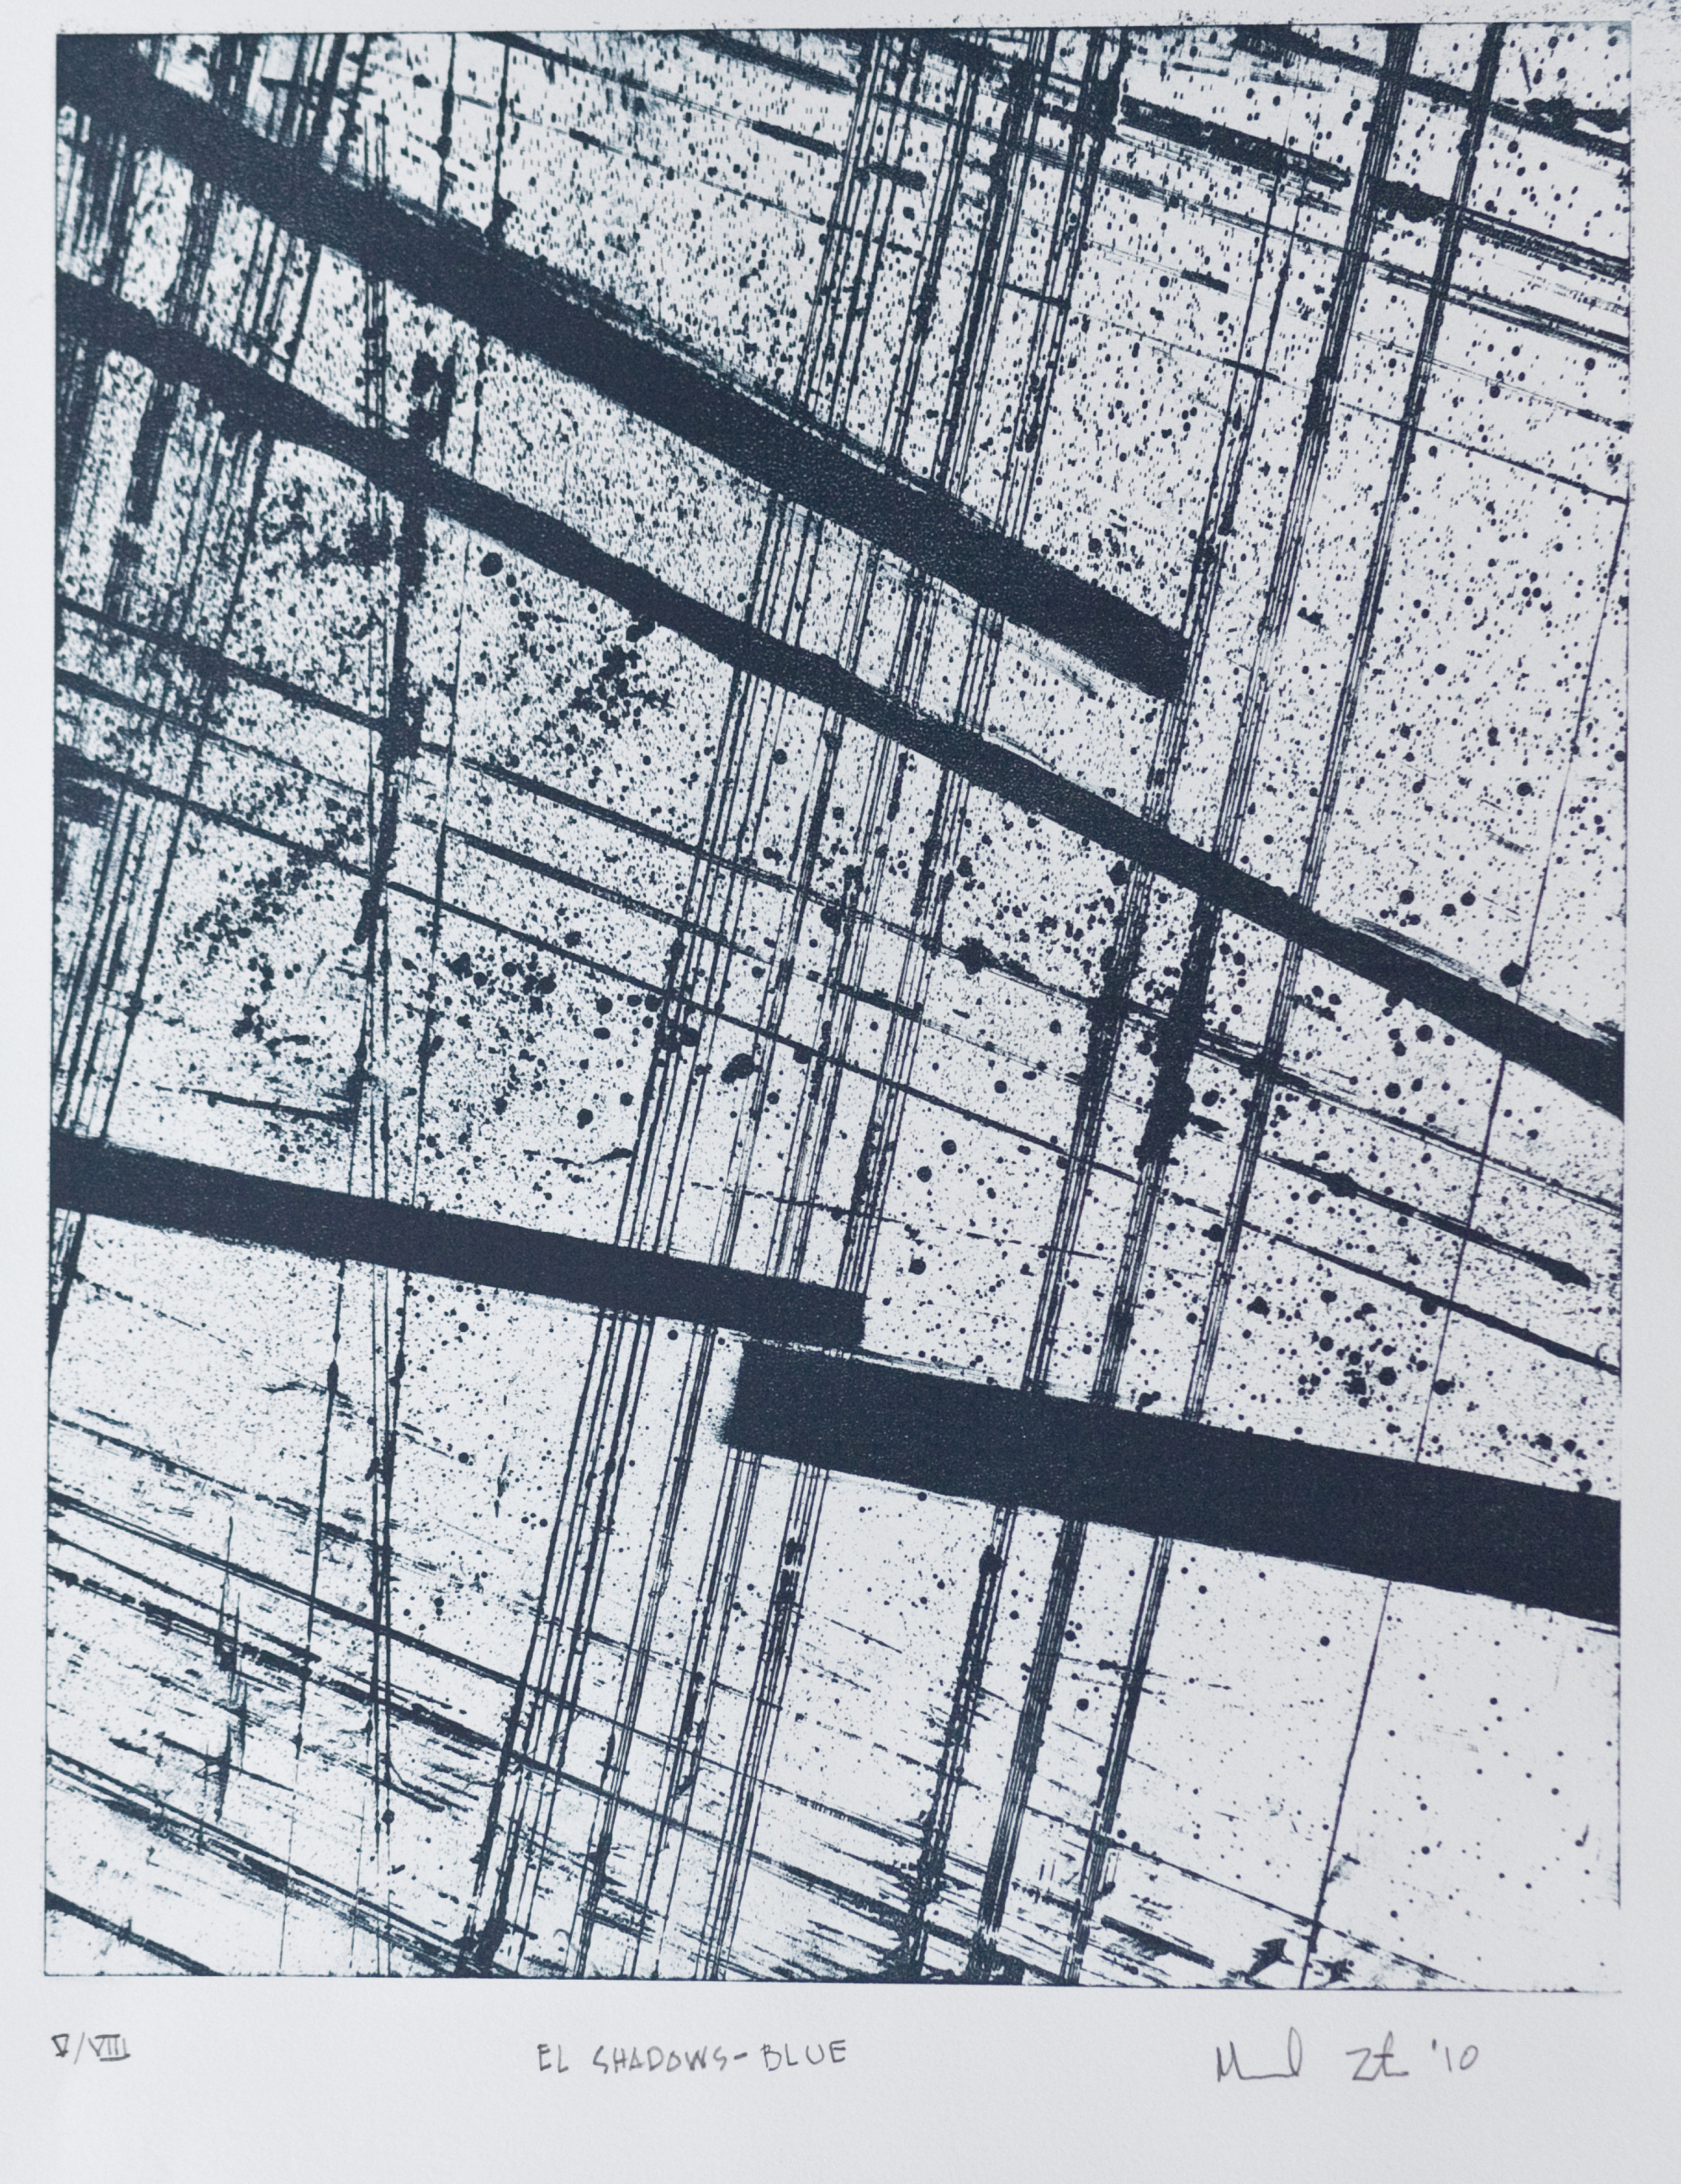 El Shadows, Blue   lithograph on Rives BFK Arches Printing paper